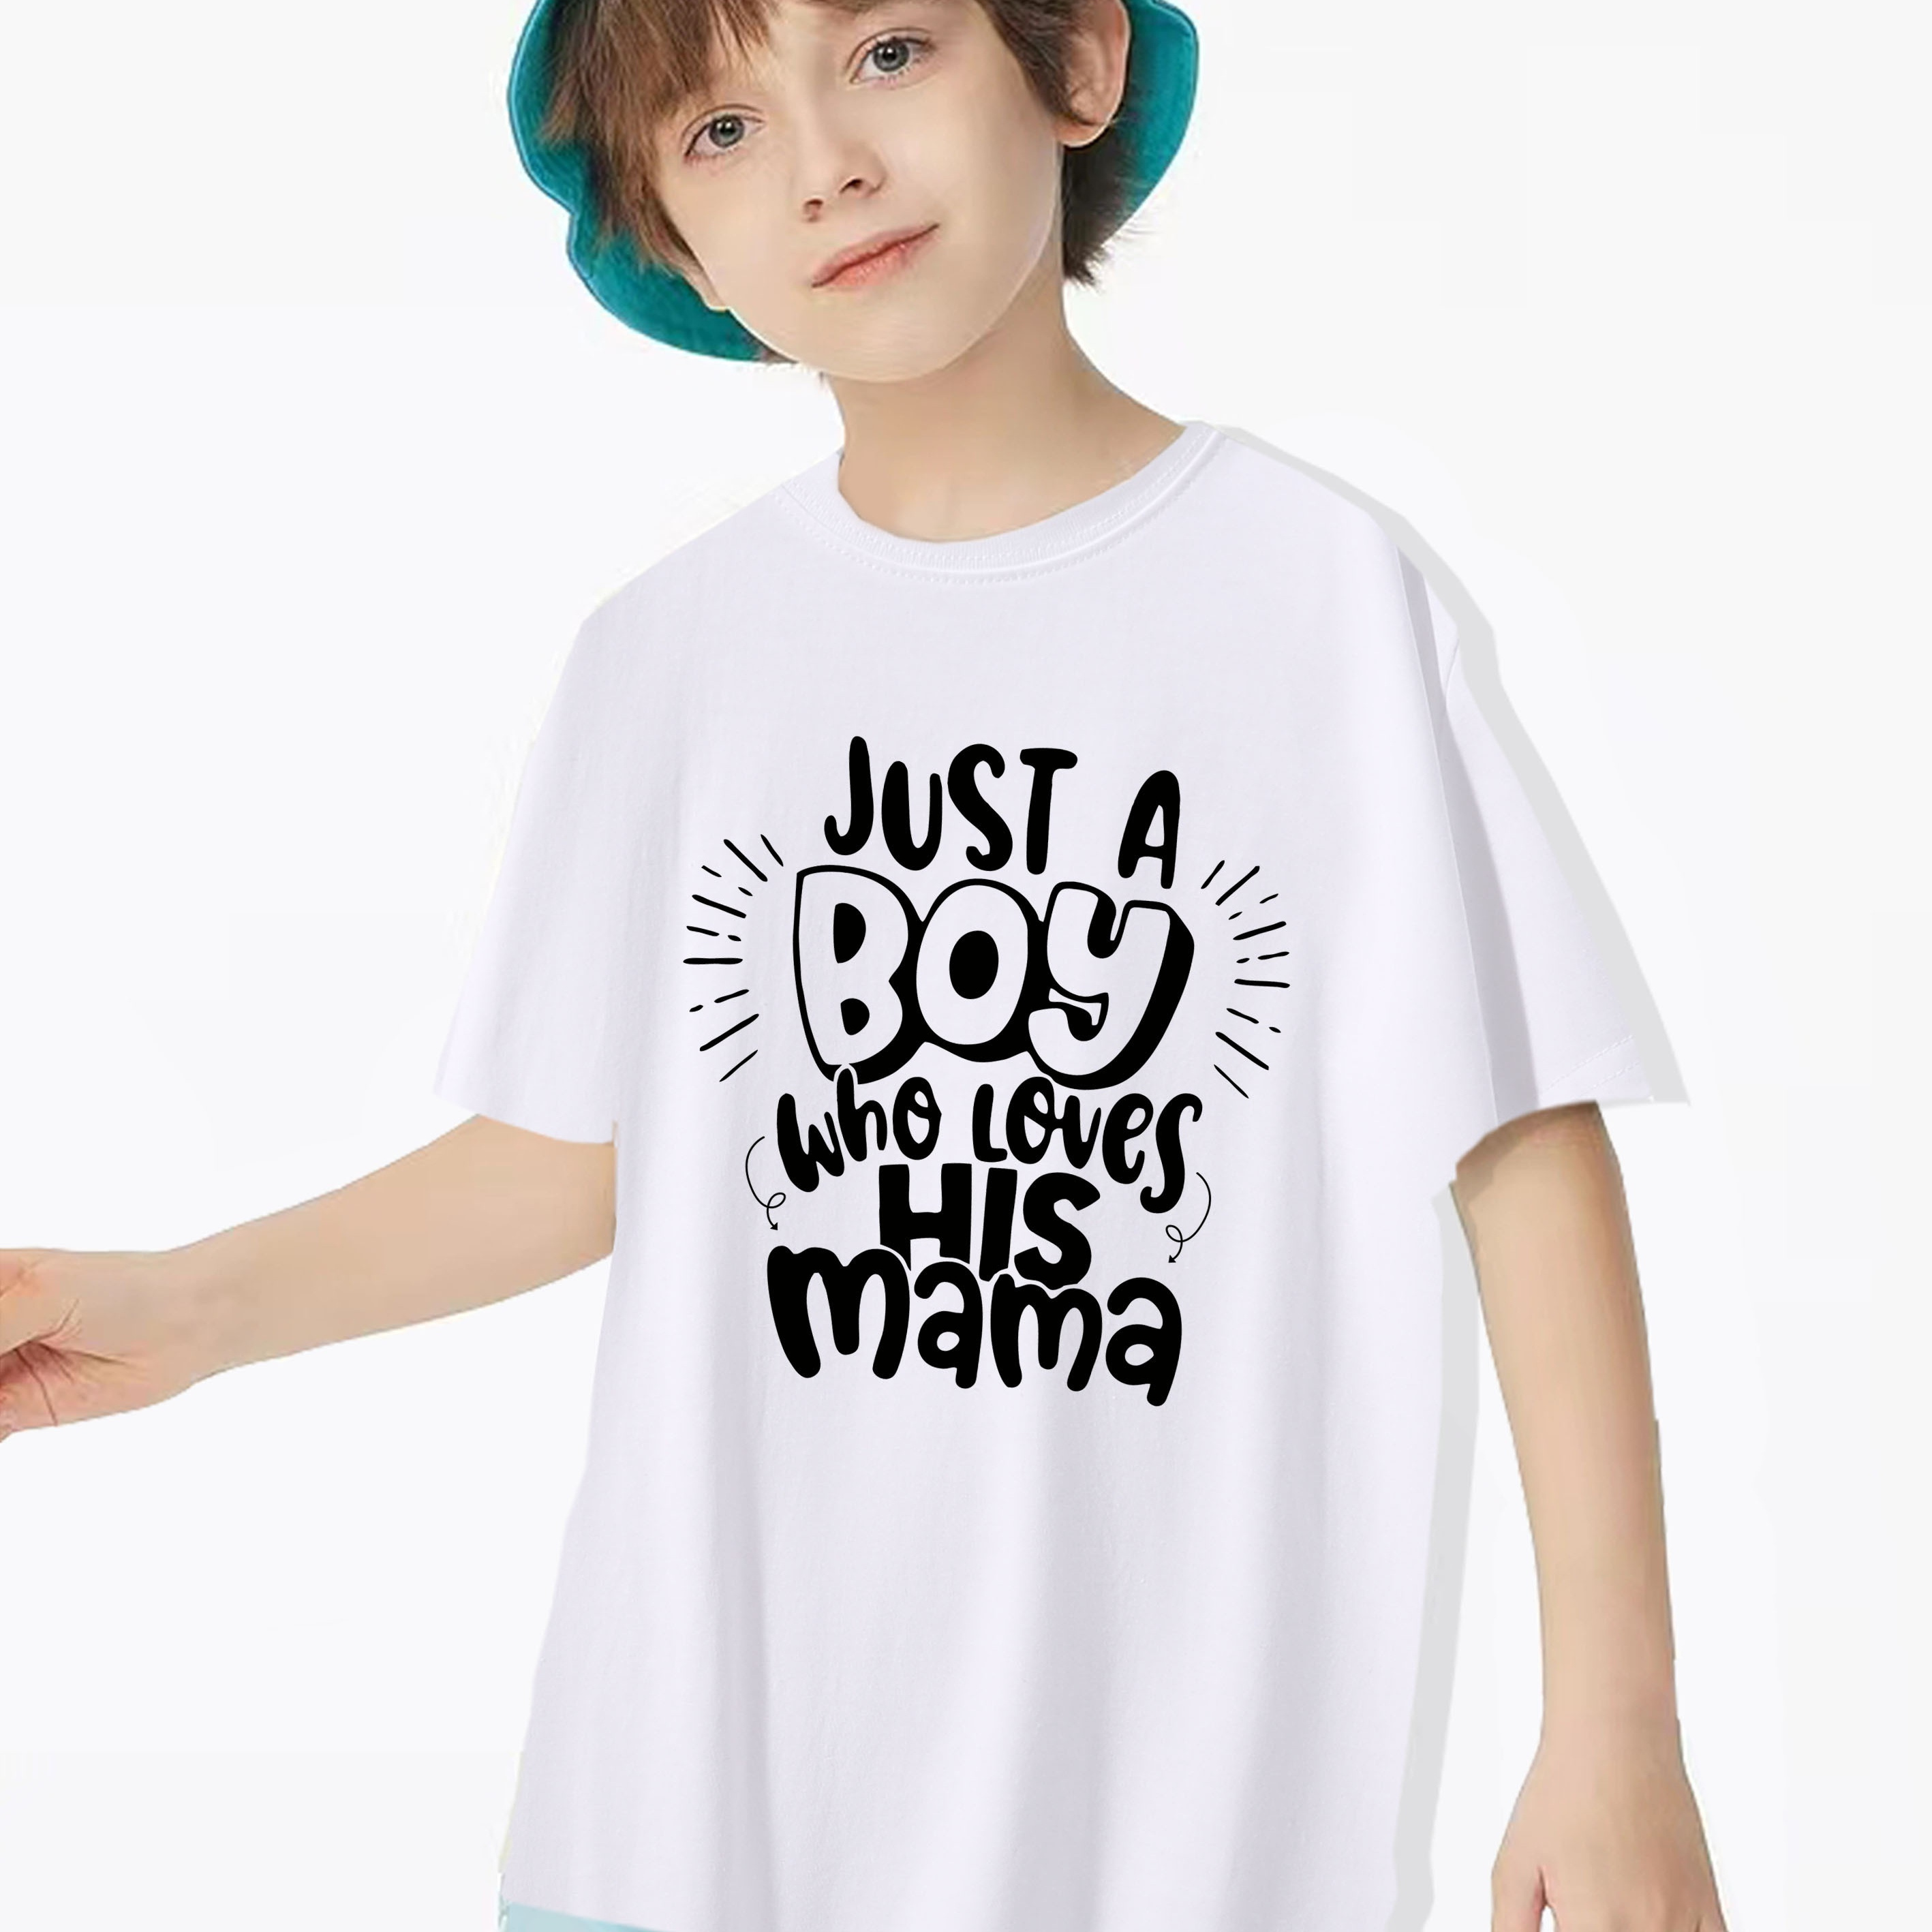 

Just A Boy Who Loves His Mama Print Tee Tops, Boys Round Neck Casual Short Sleeve Comfortable Soft Premium T-shirt